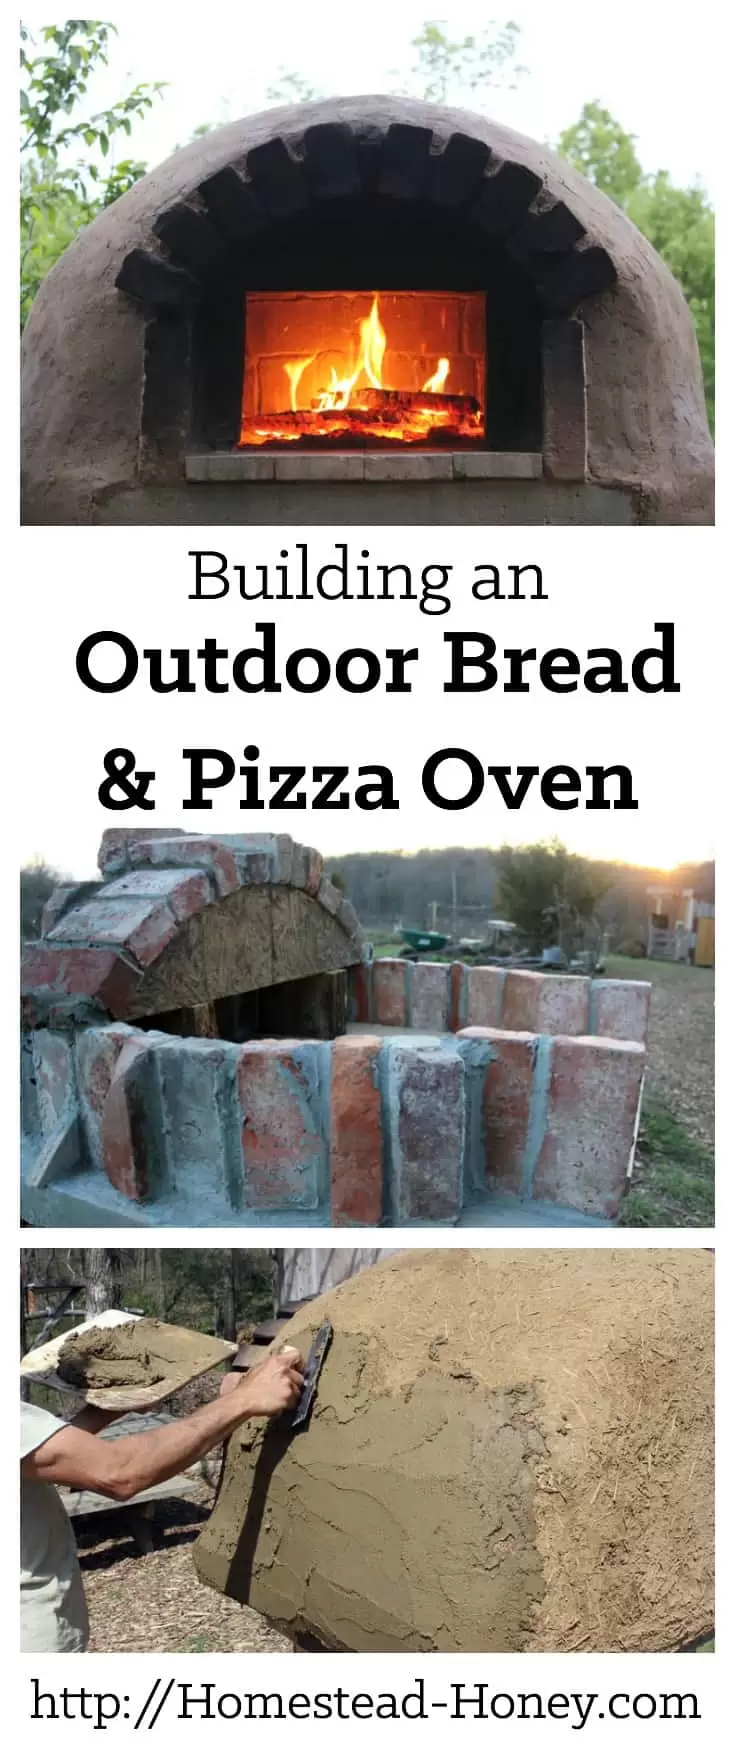 Our family built this durable and beautiful brick and cob outdoor pizza oven for under 0. As we did, we documented the entire process, so you could also build your own backyard pizza oven. | Homestead Honey